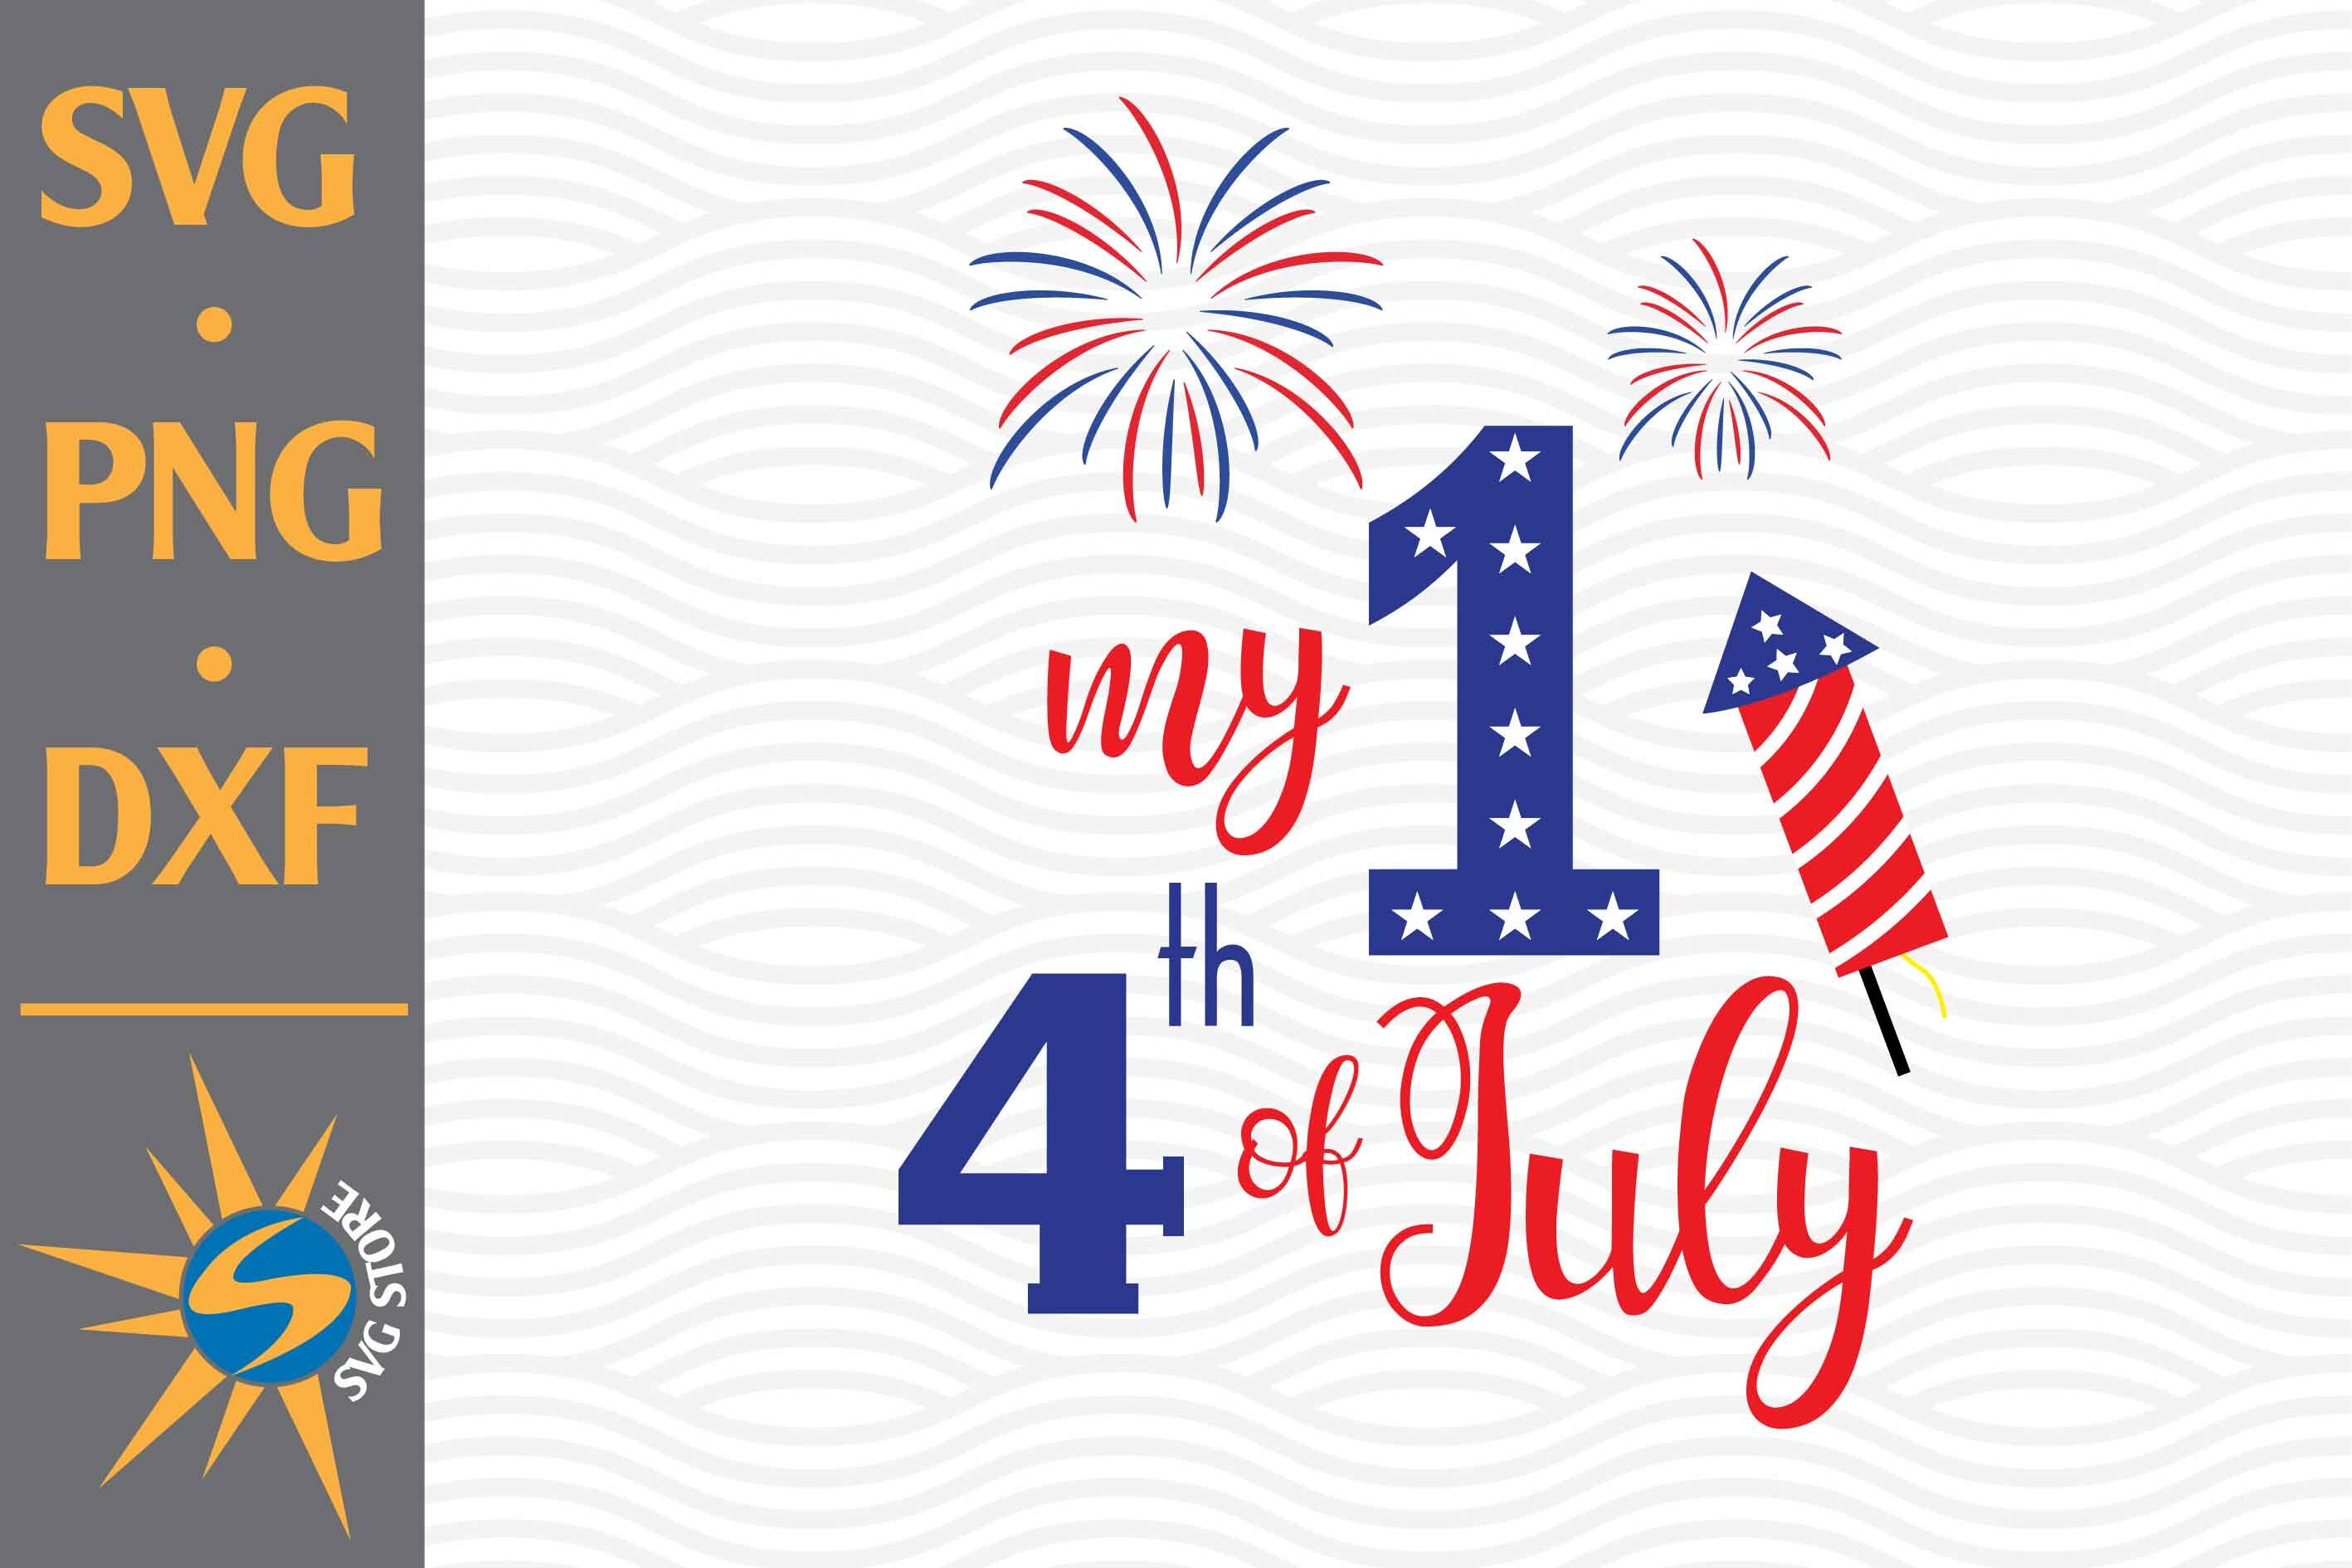 My 1st First 4th July SVG, PNG, DXF Digital Files Include By